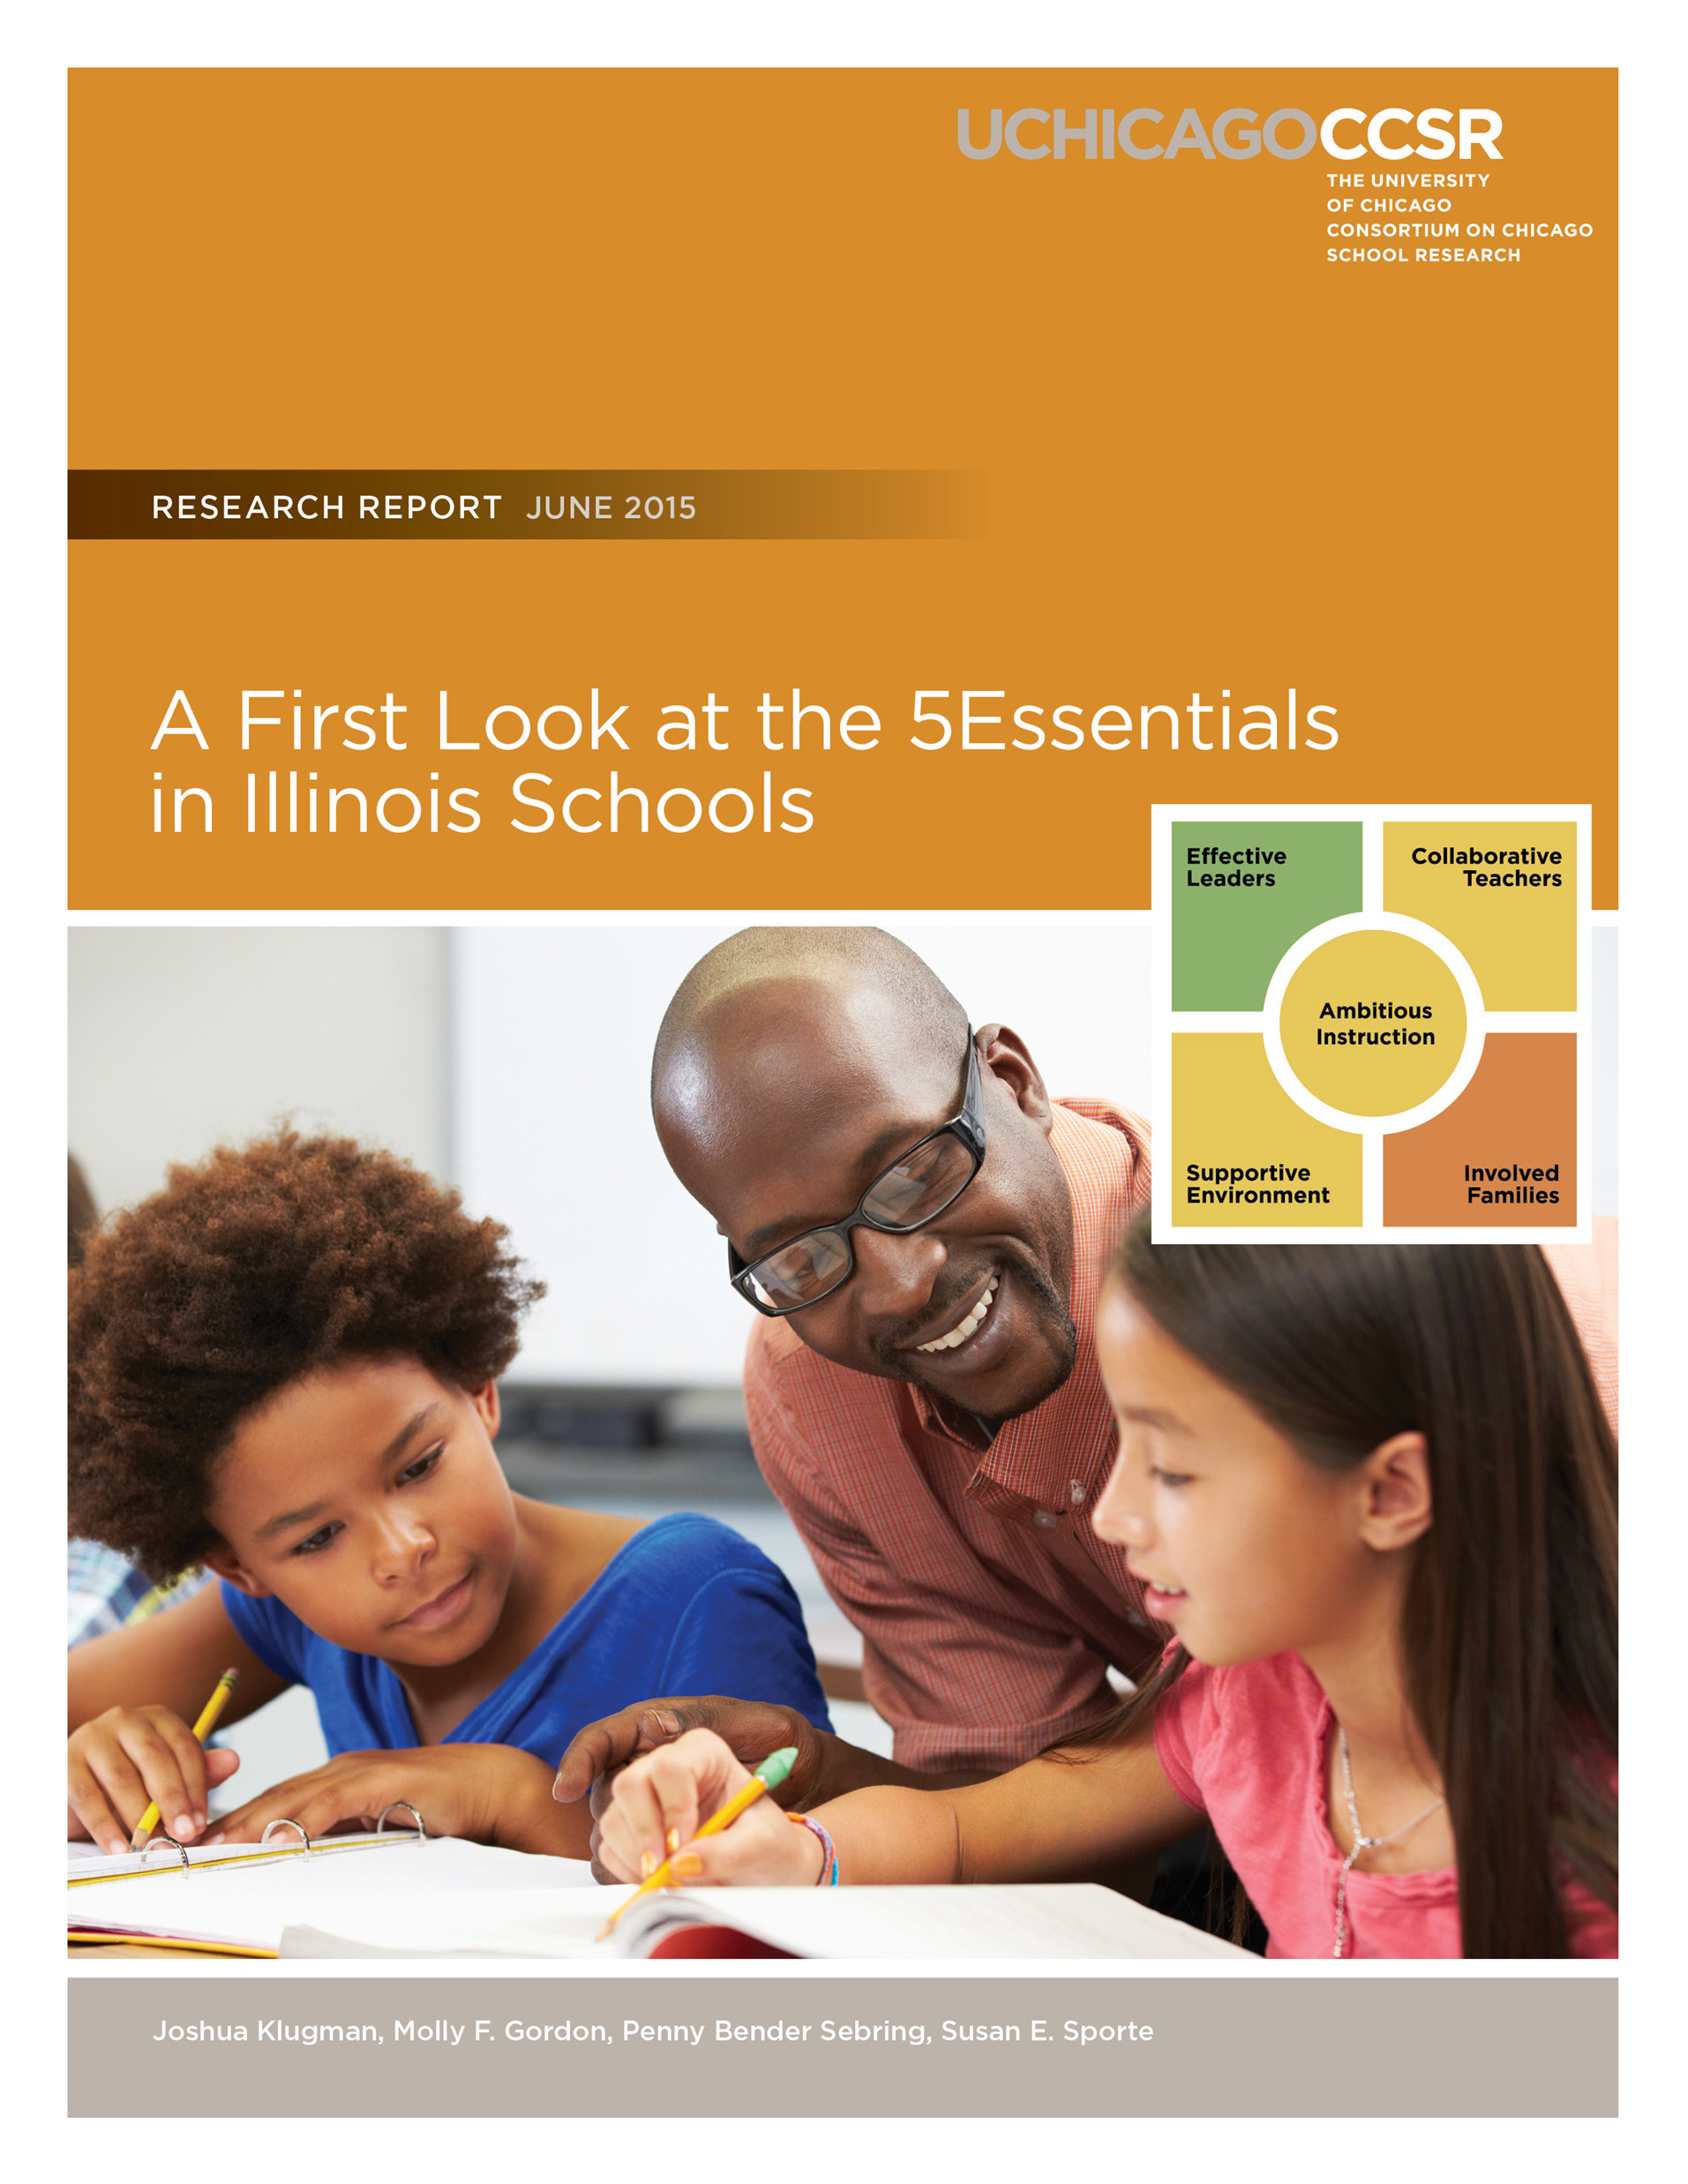 A First Look at the 5Essentials in Illinois Schools: Executive Summary